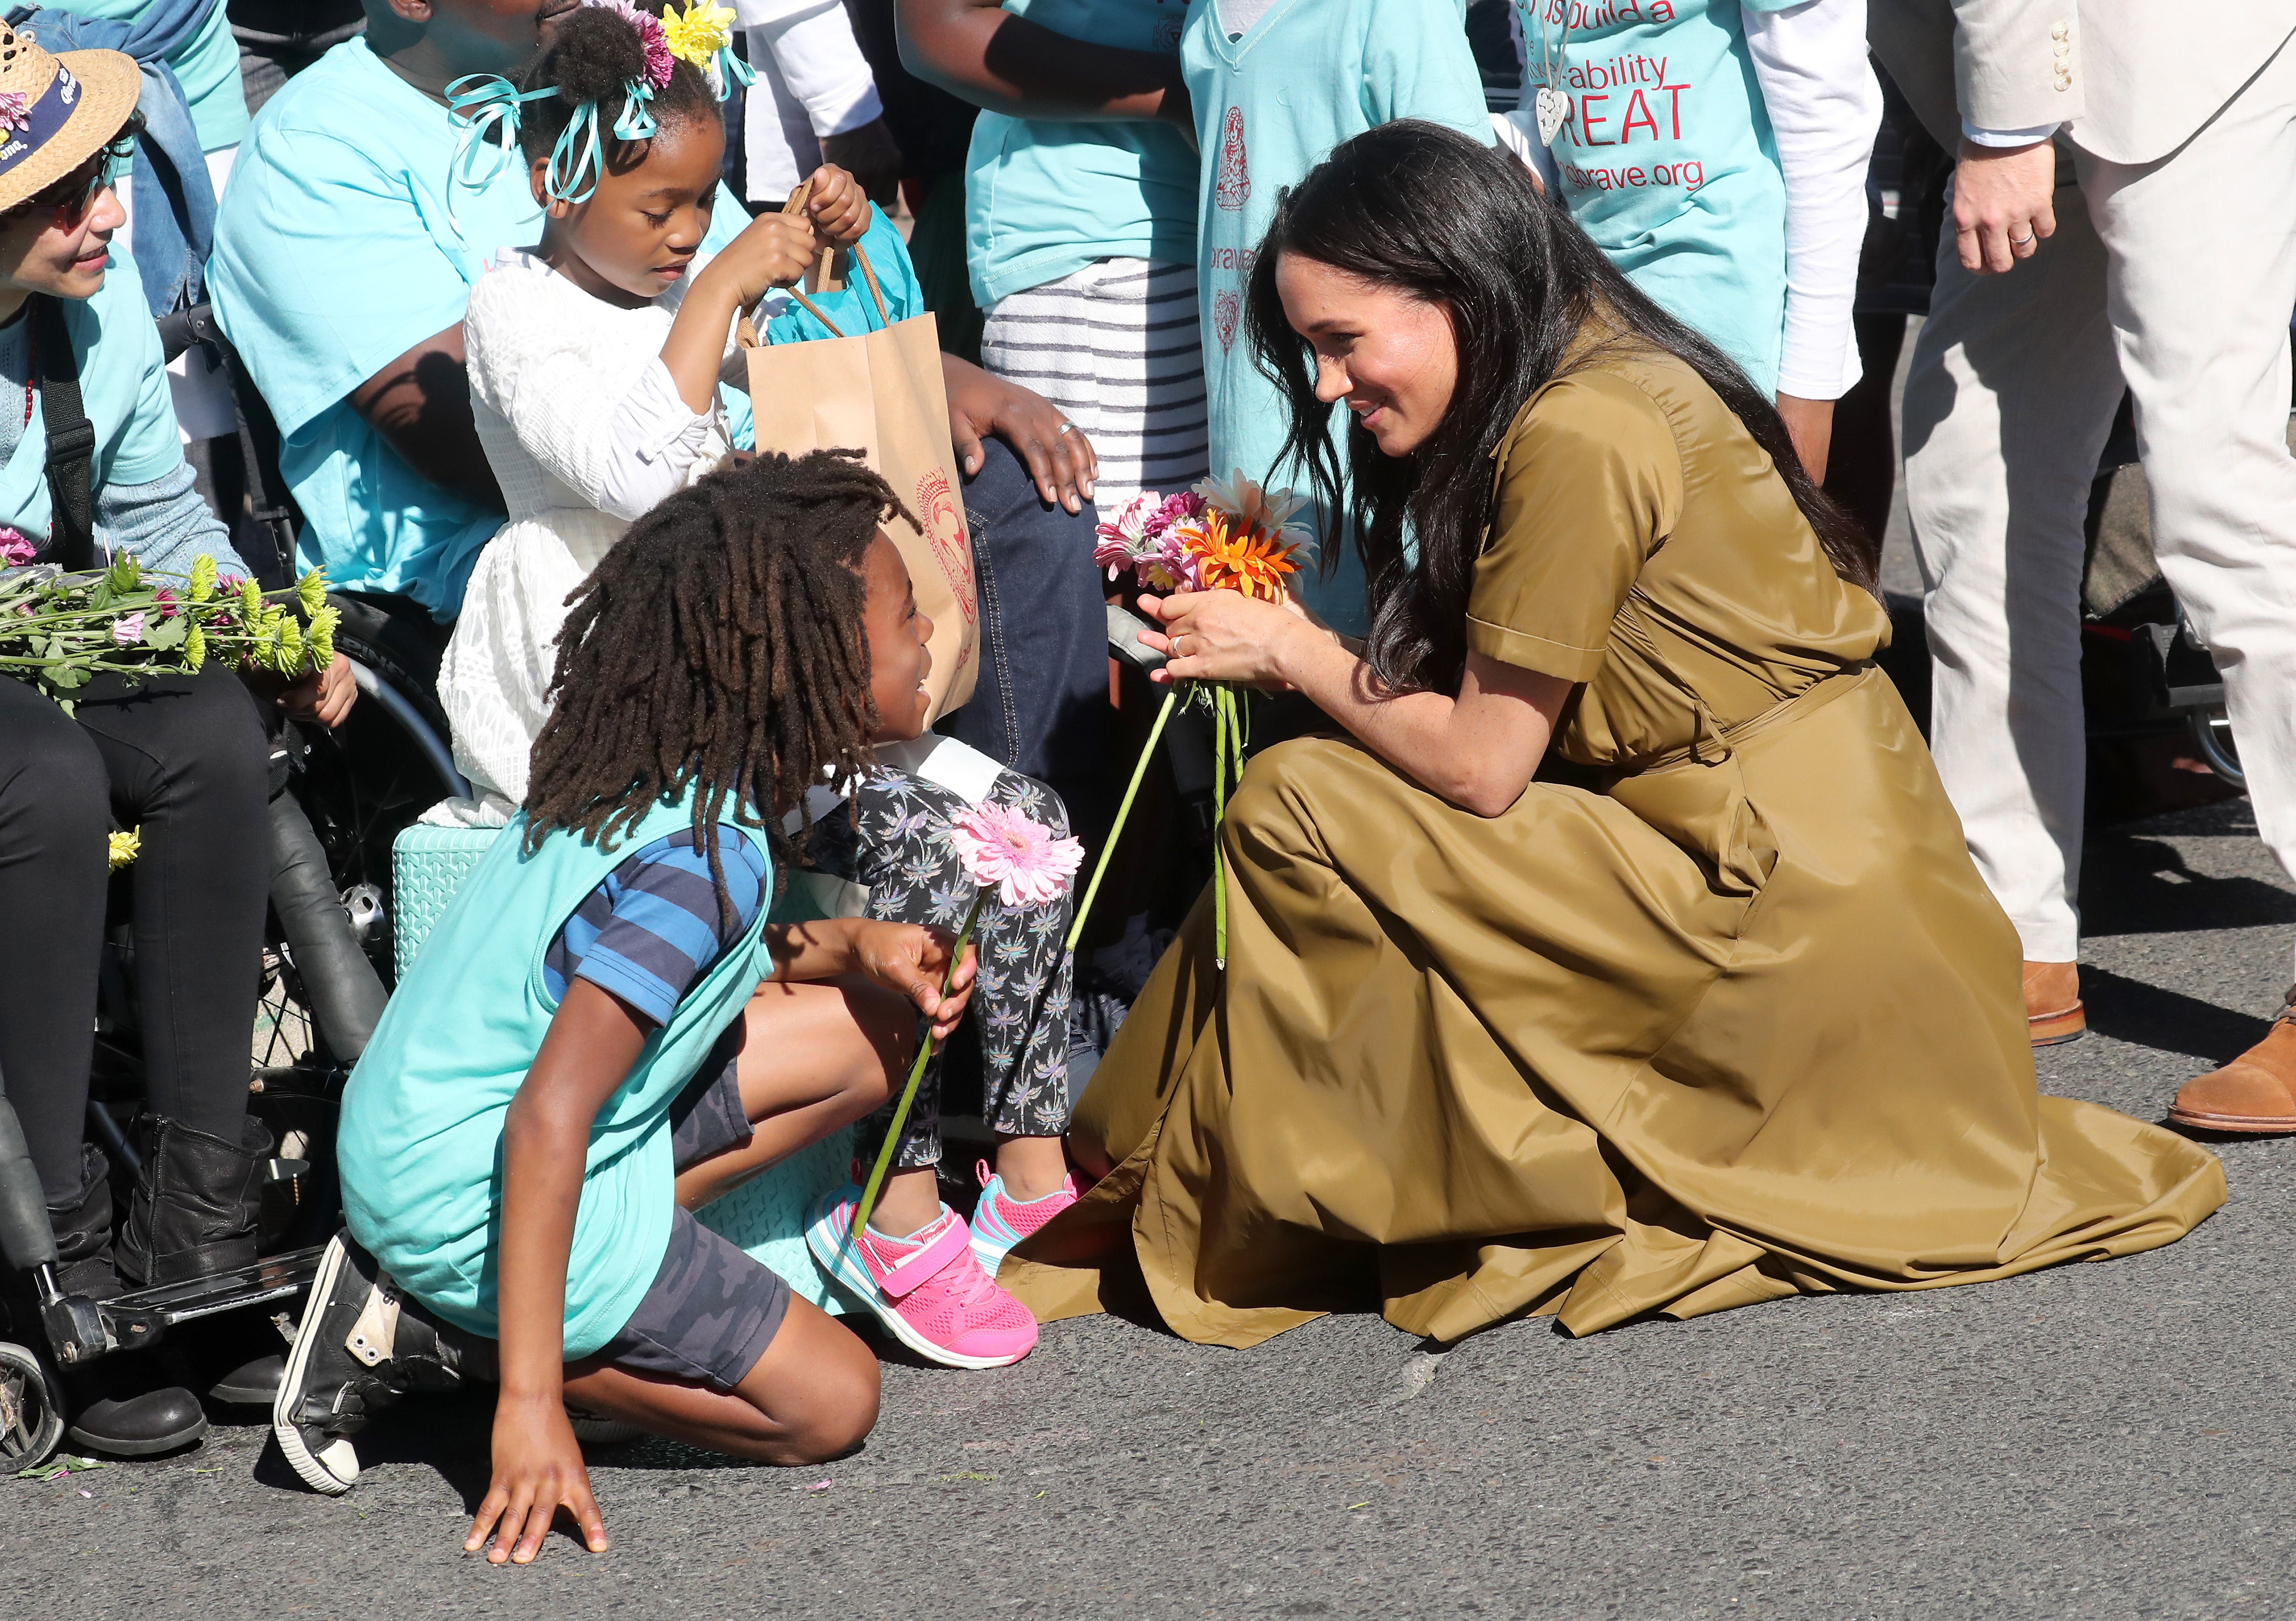 CAPE TOWN, SOUTH AFRICA - SEPTEMBER 24: Meghan, Duchess of Sussex meets a young wellwisher as she and Prince Harry, Duke of Sussex walk through the colourful and multicultural neighbourhood of Bo-Kaap on Heritage Day during their royal tour of South Africa on September 24, 2019 in Cape Town, South Africa.